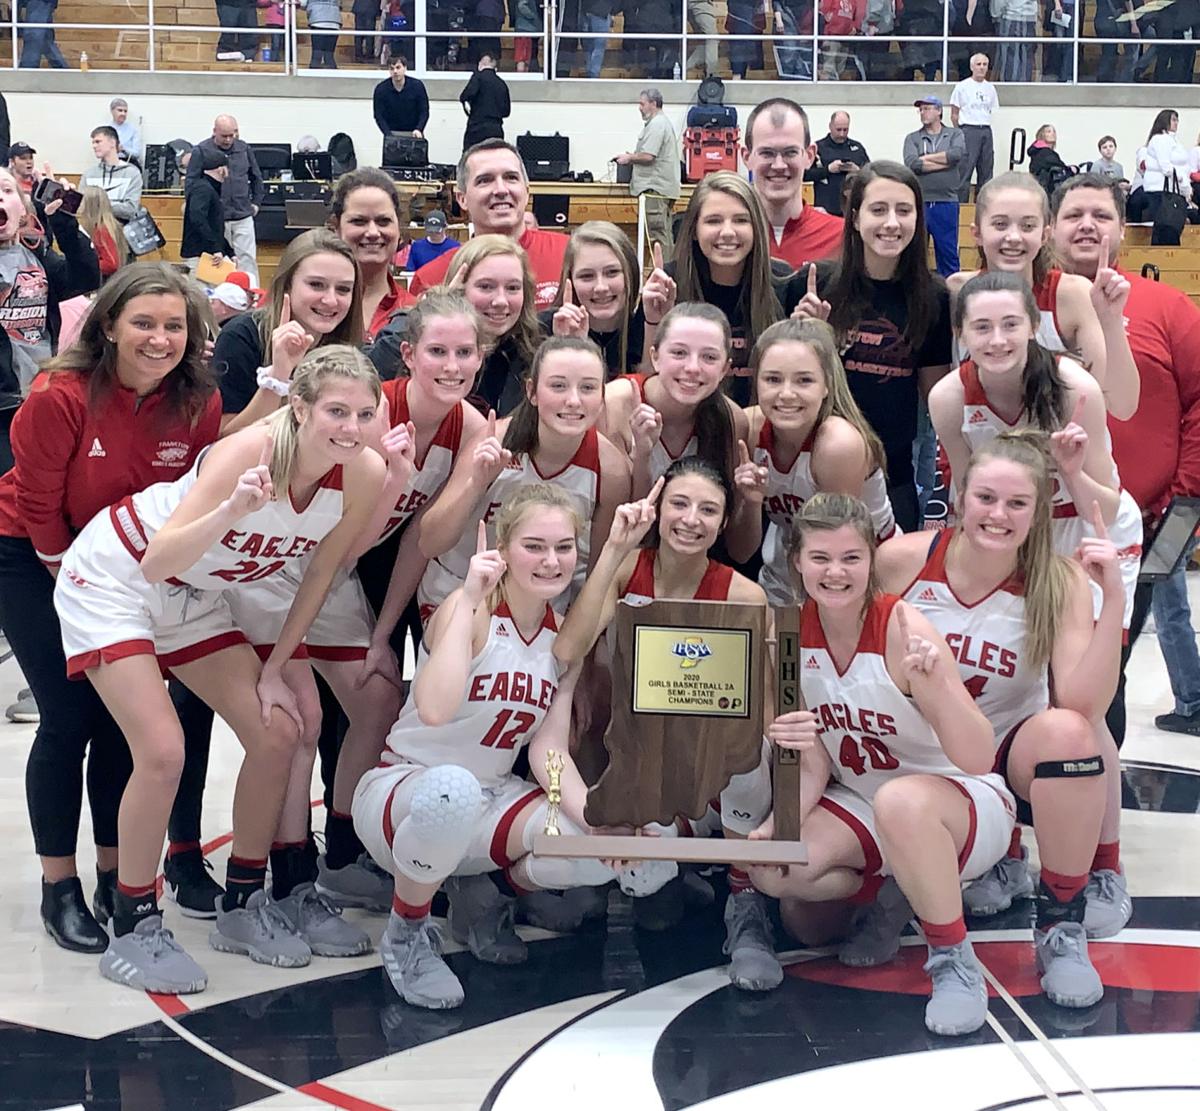 Show Stopper Ava Gardner S Career High Lifts Frankton Girls To First Ever State Final High School Sports Heraldbulletin Com